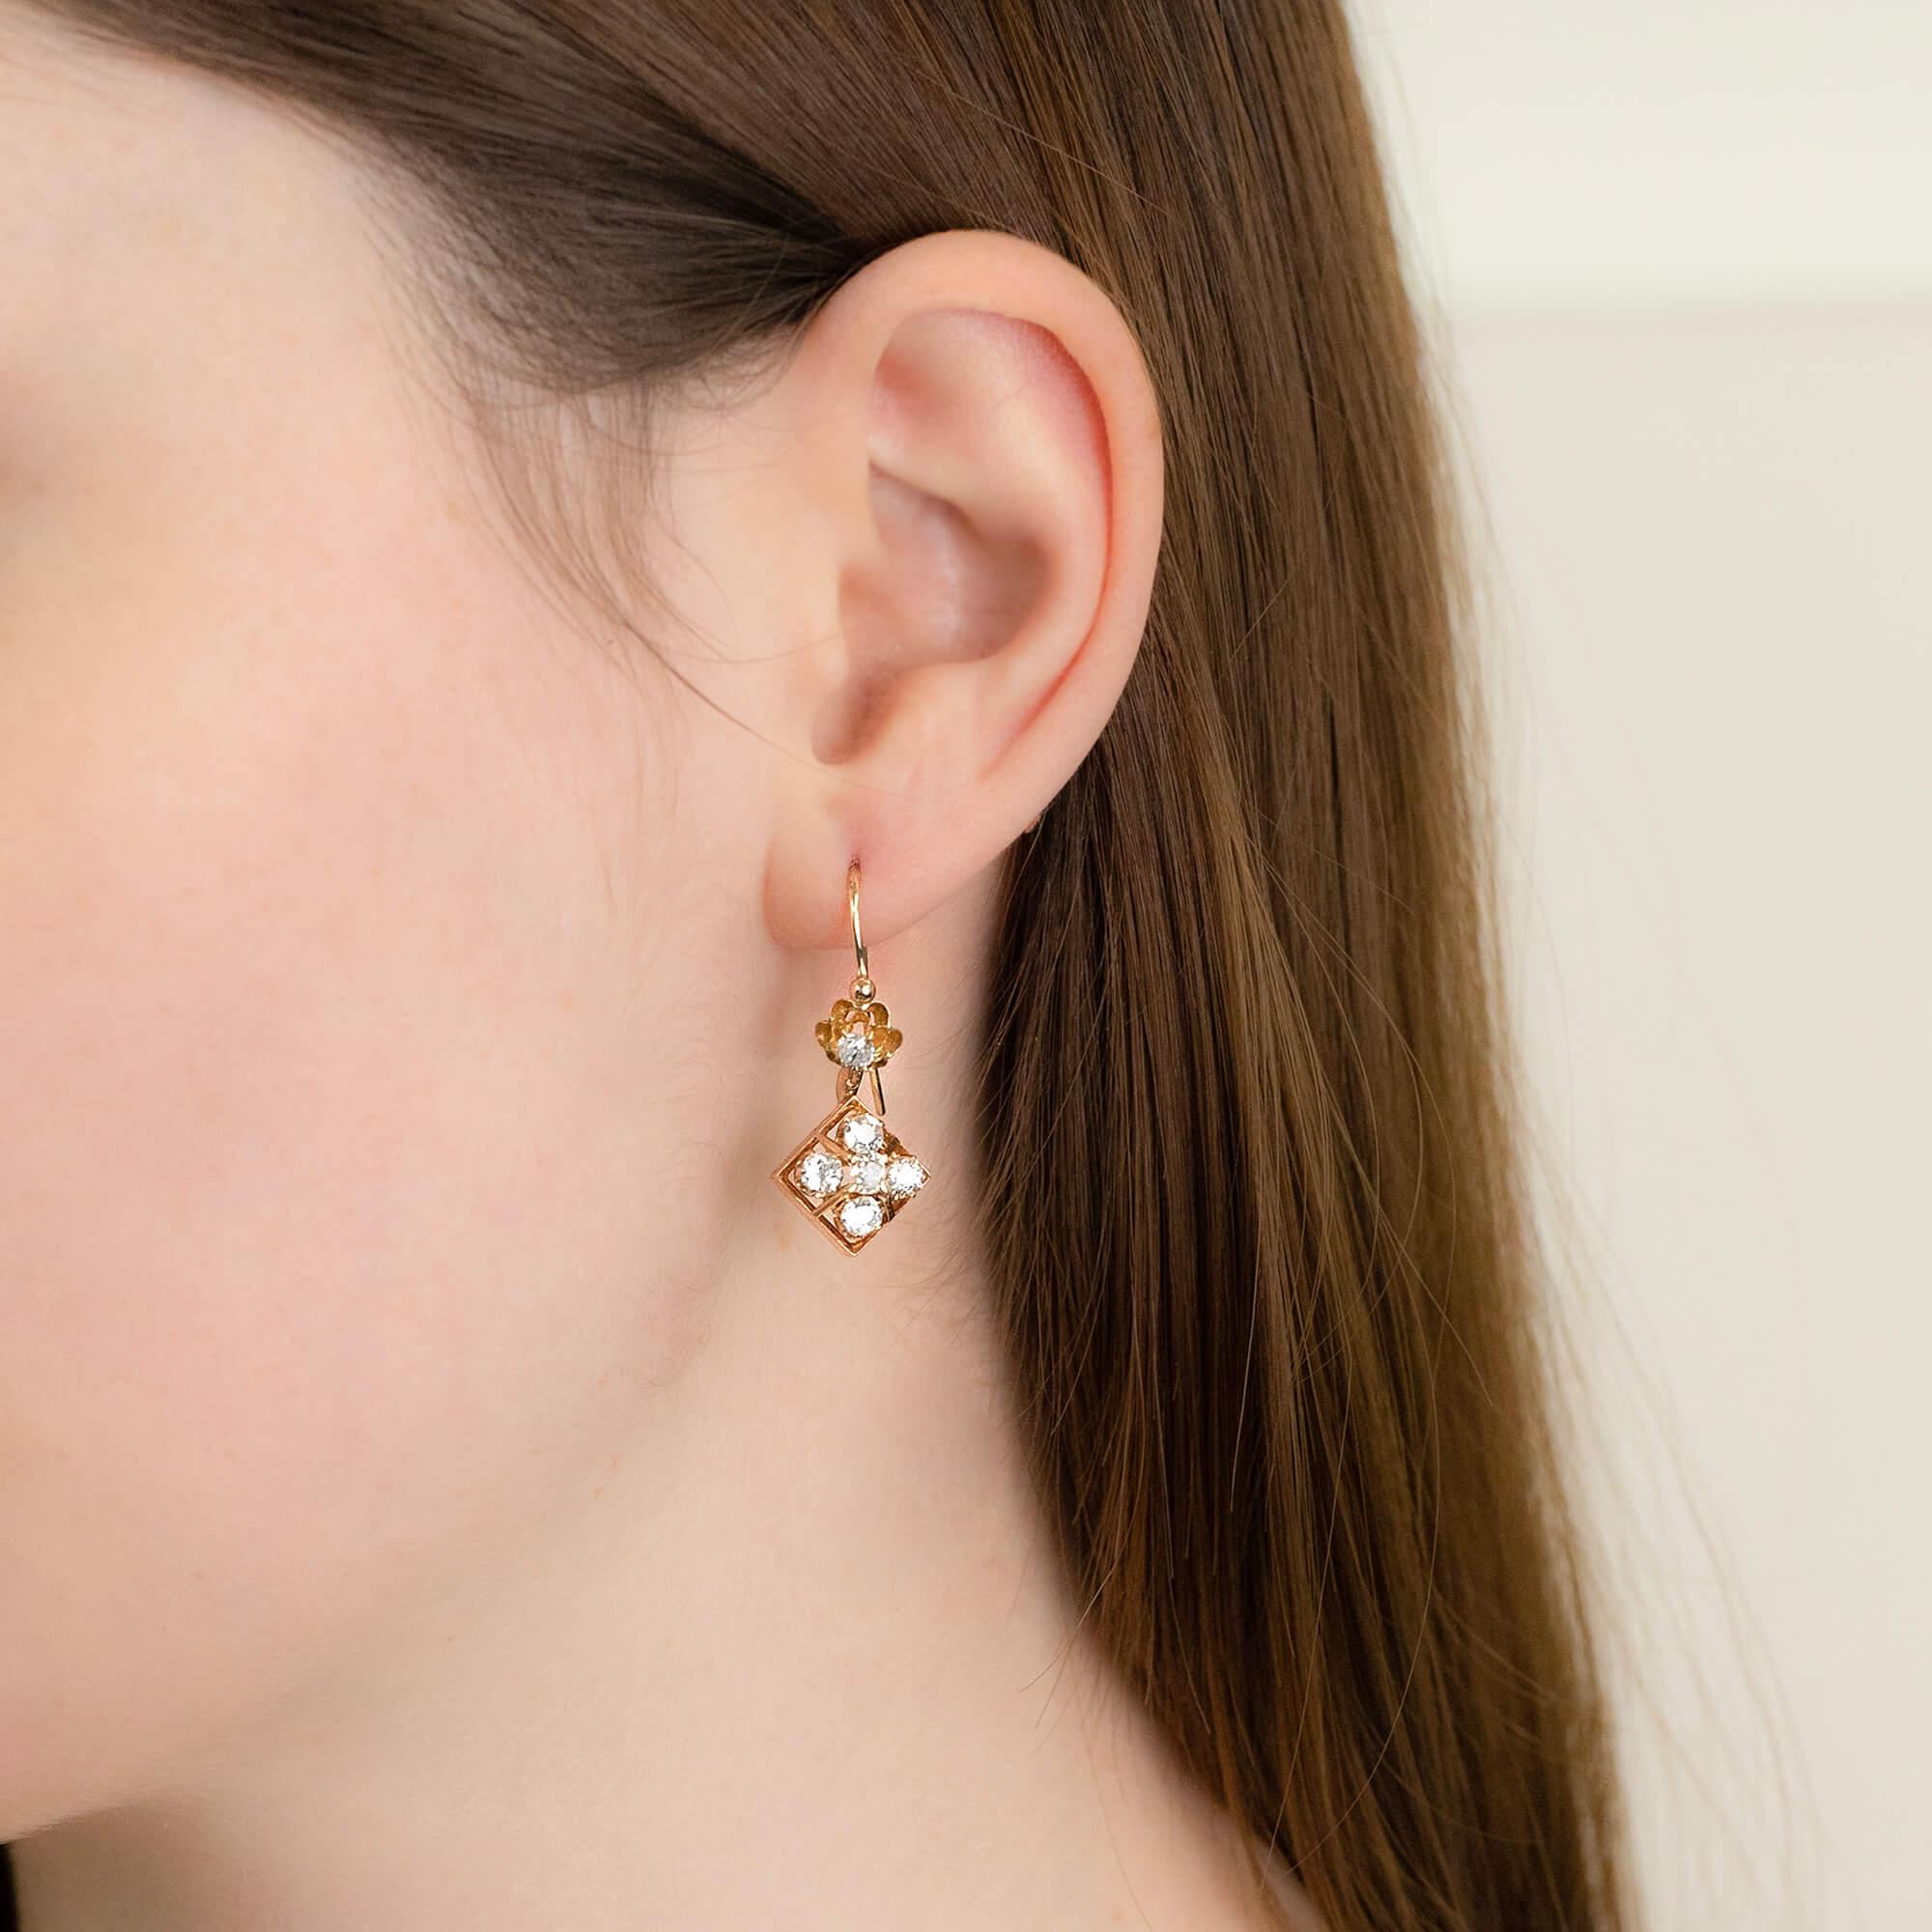 One pair of drop earrings and each set with six old mine cut diamonds. Crafted in all yellow gold with a scalloped diamond set scalloped setting and shepherd hook to a knife-edged box setting earrings. This pair of earrings were constructed by